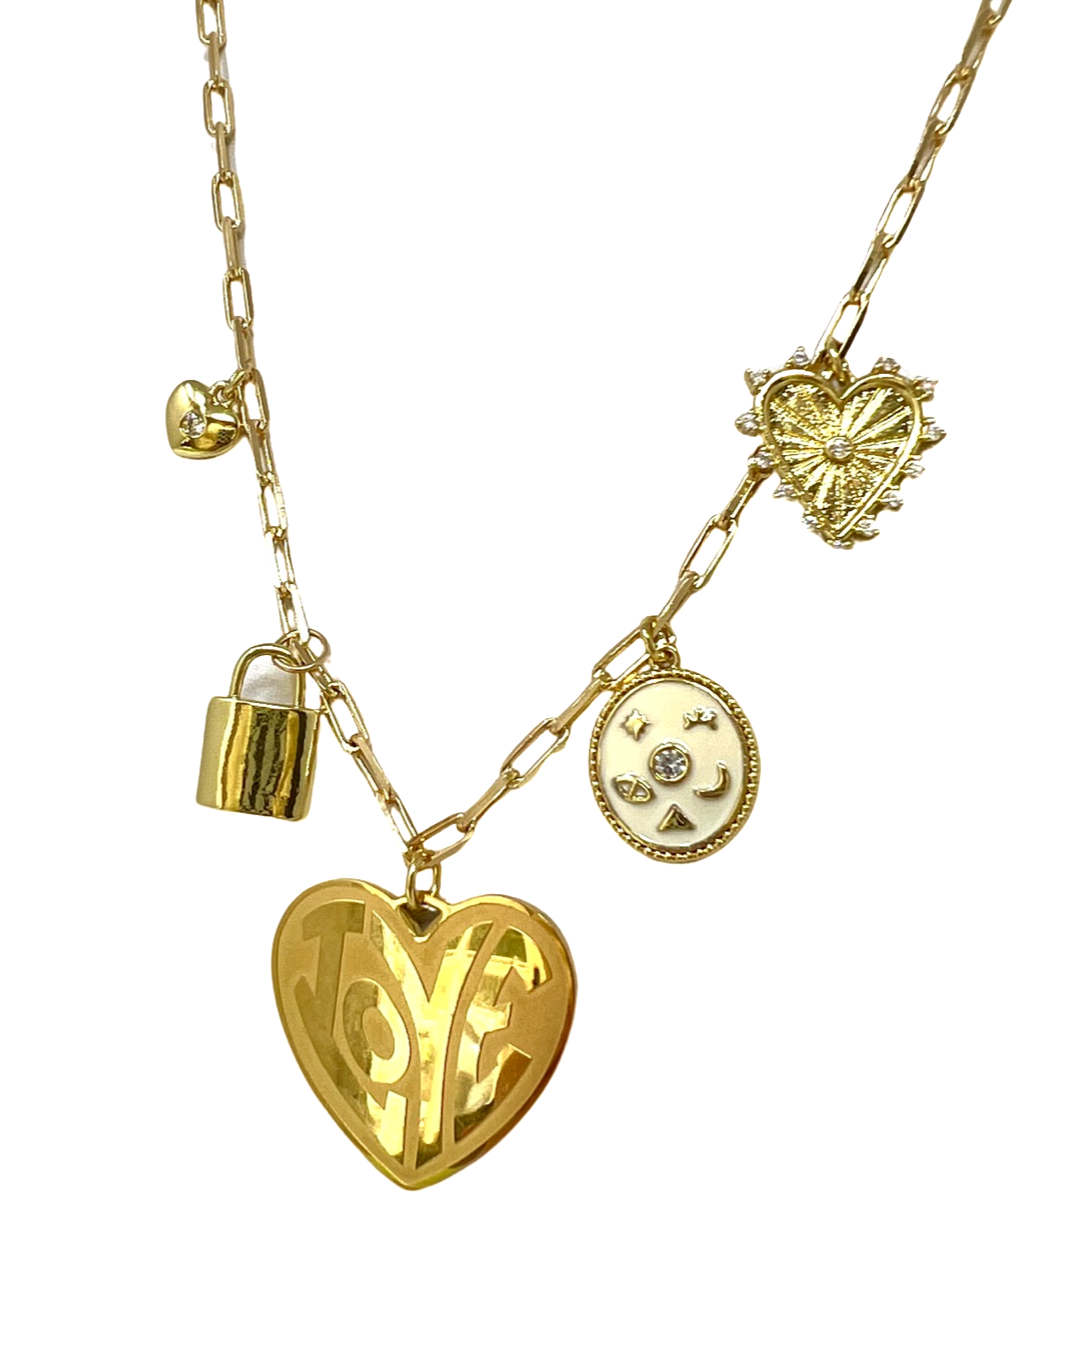 Whole Lotta Love Charm Necklace in Gold